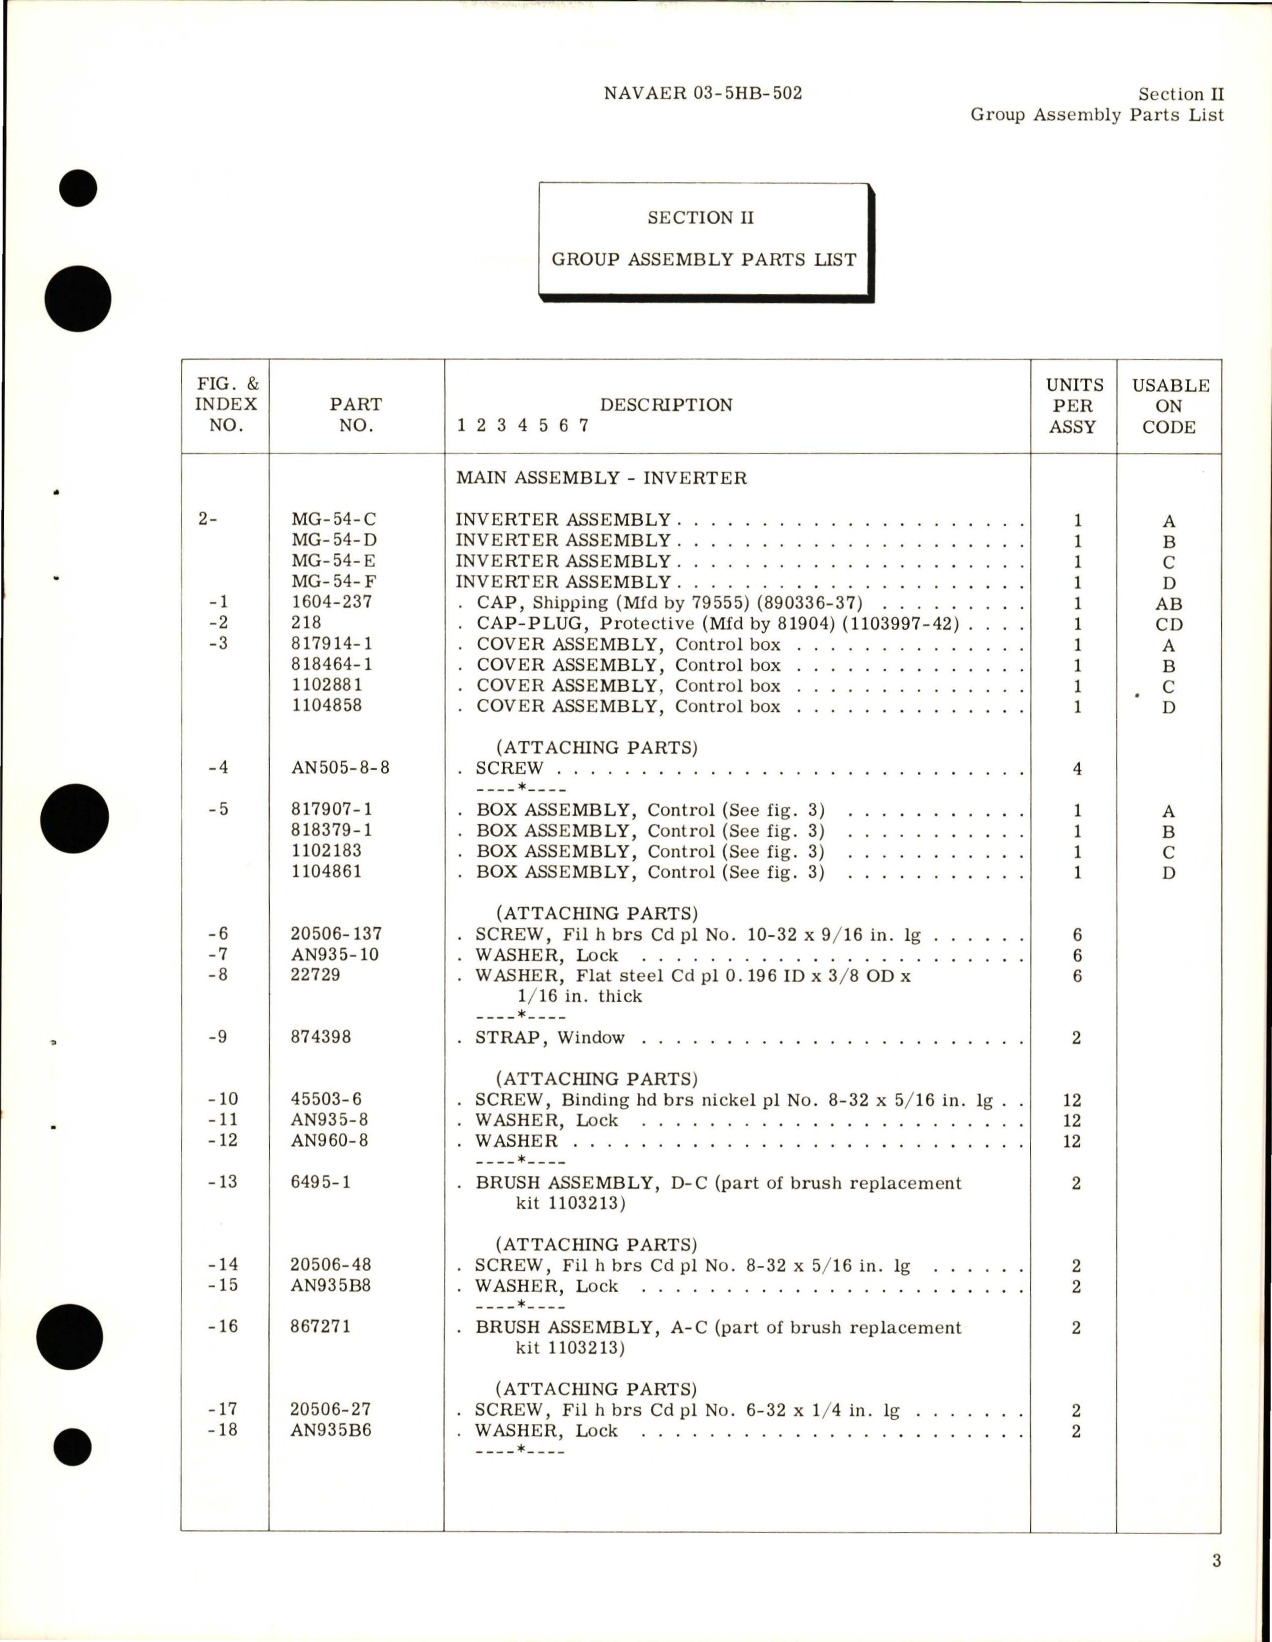 Sample page 7 from AirCorps Library document: Illustrated Parts Breakdown for Inverter Assembly - Types MG-54-C, MG-54-D, MG-54-E, and MG-54-F